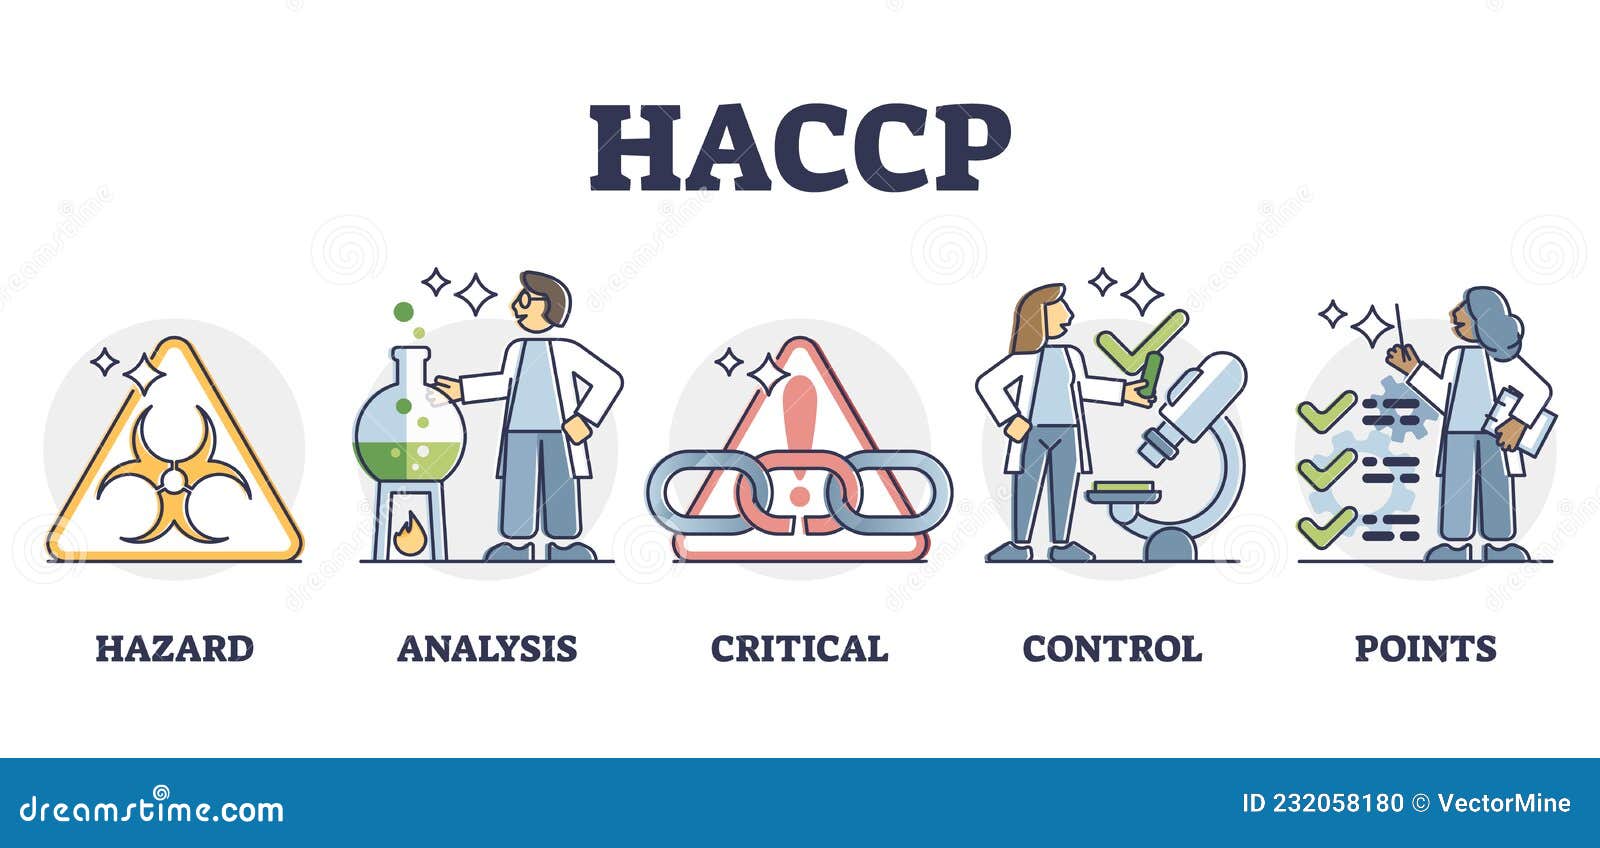 haccp food safety preventive analysis and control system, outline diagram